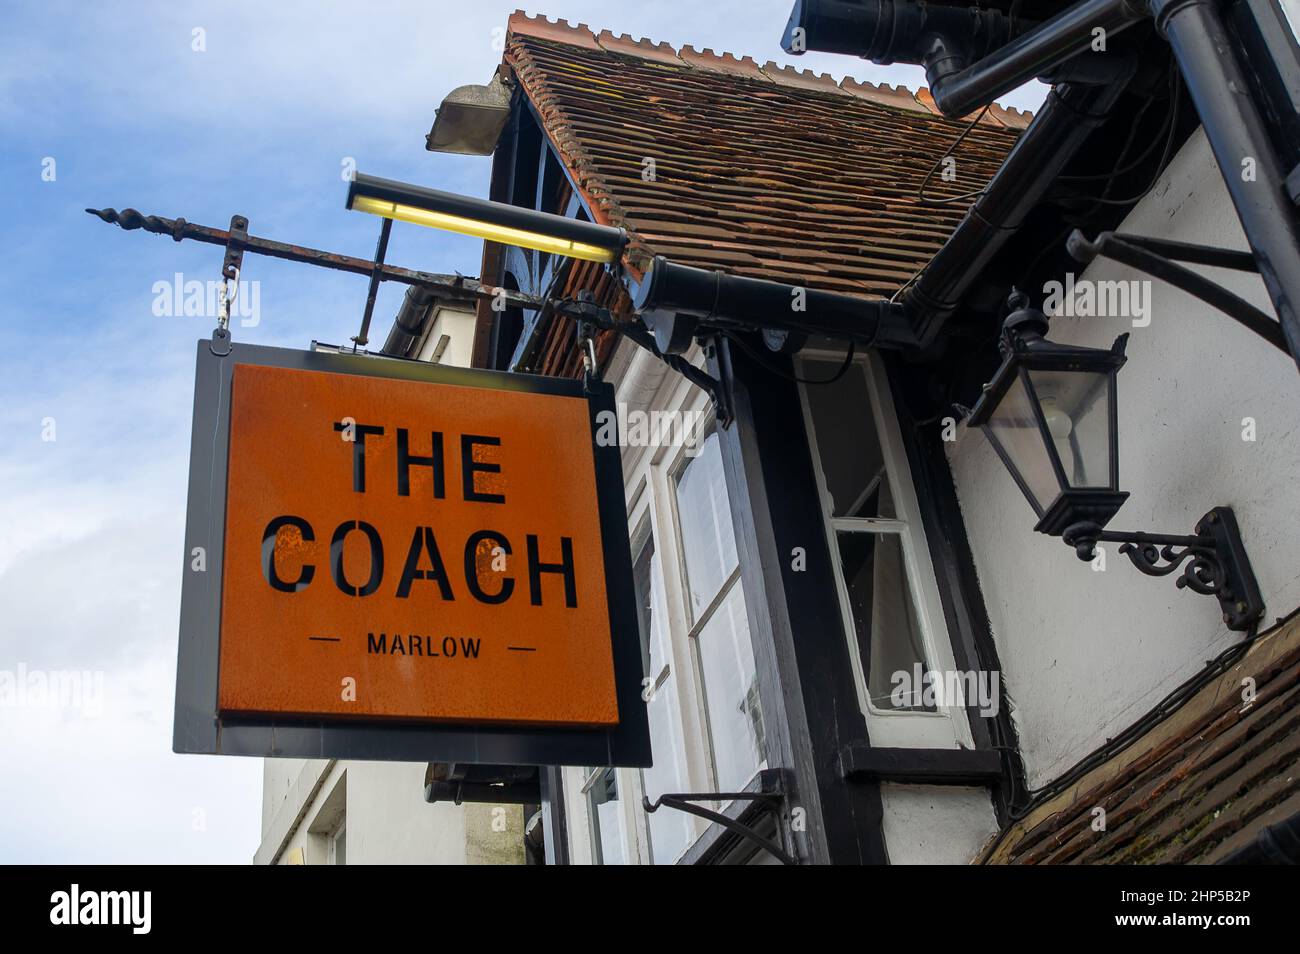 Marlow, Buckinghamshire, UK. 17th February, 2022. The Coach pub and restaurant run by celebrity chef Tom Kerridge has retained it's One Michelin star rating for another year. Credit: Maureen McLean/Alamy Stock Photo